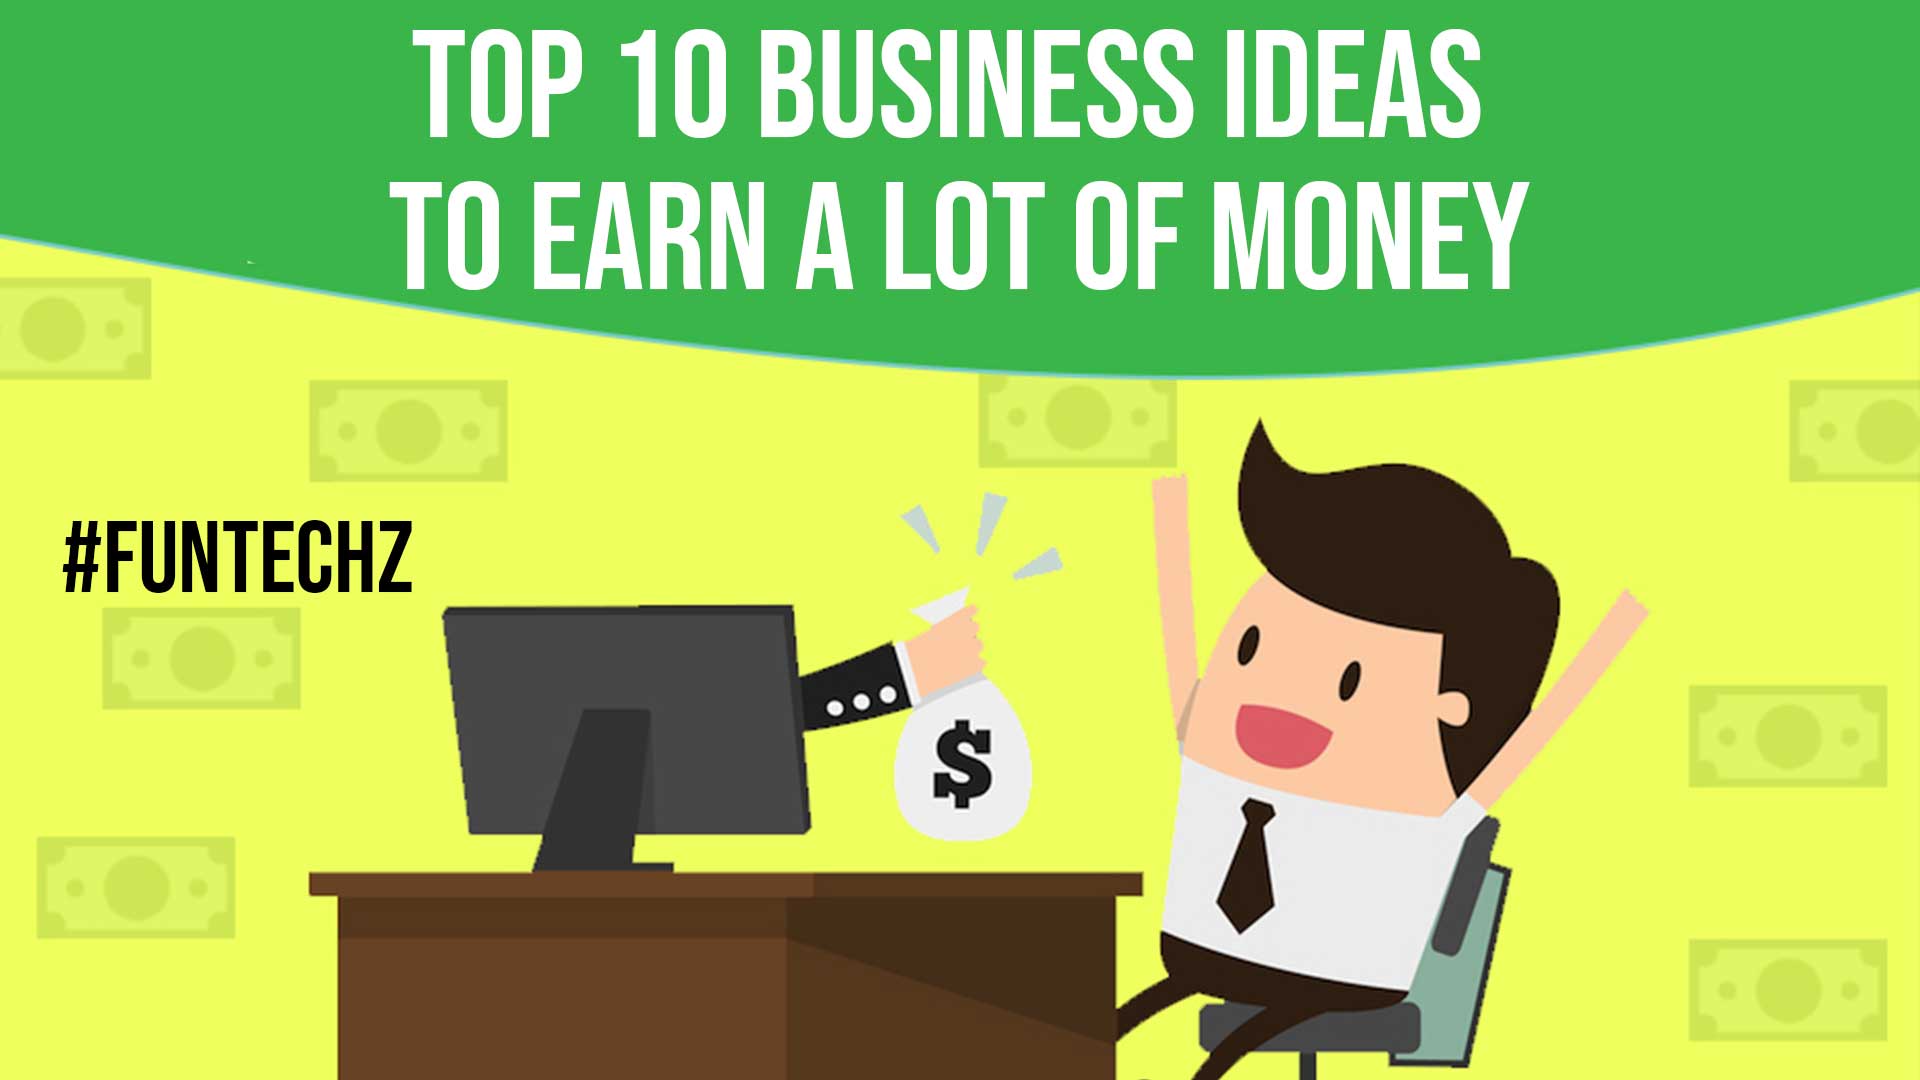 Top 10 Business Ideas to Earn a Lot of Money